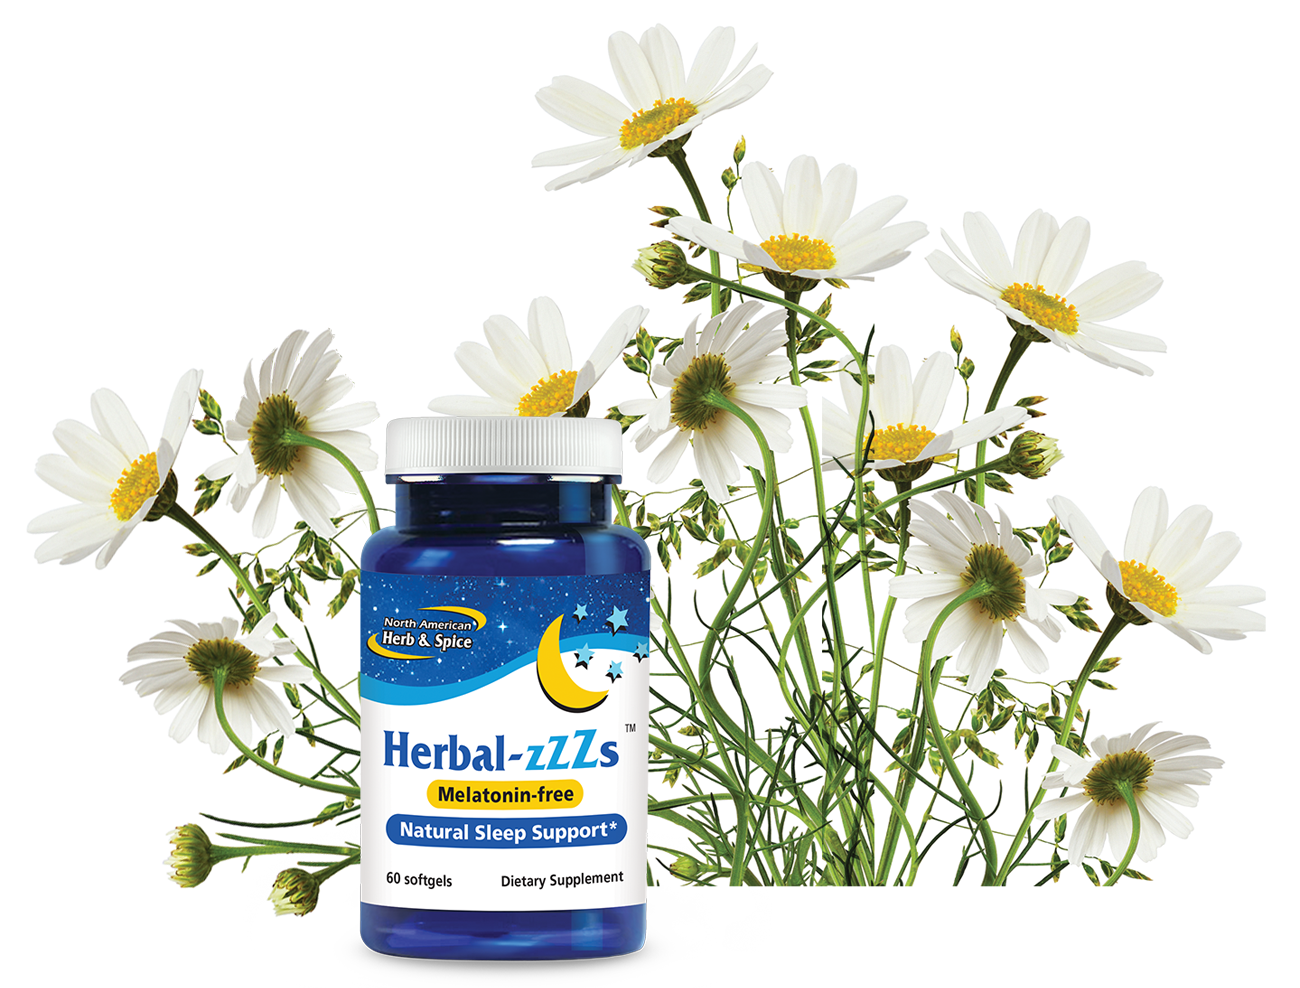 Chamomile flowers with Herbal-Zzzs product